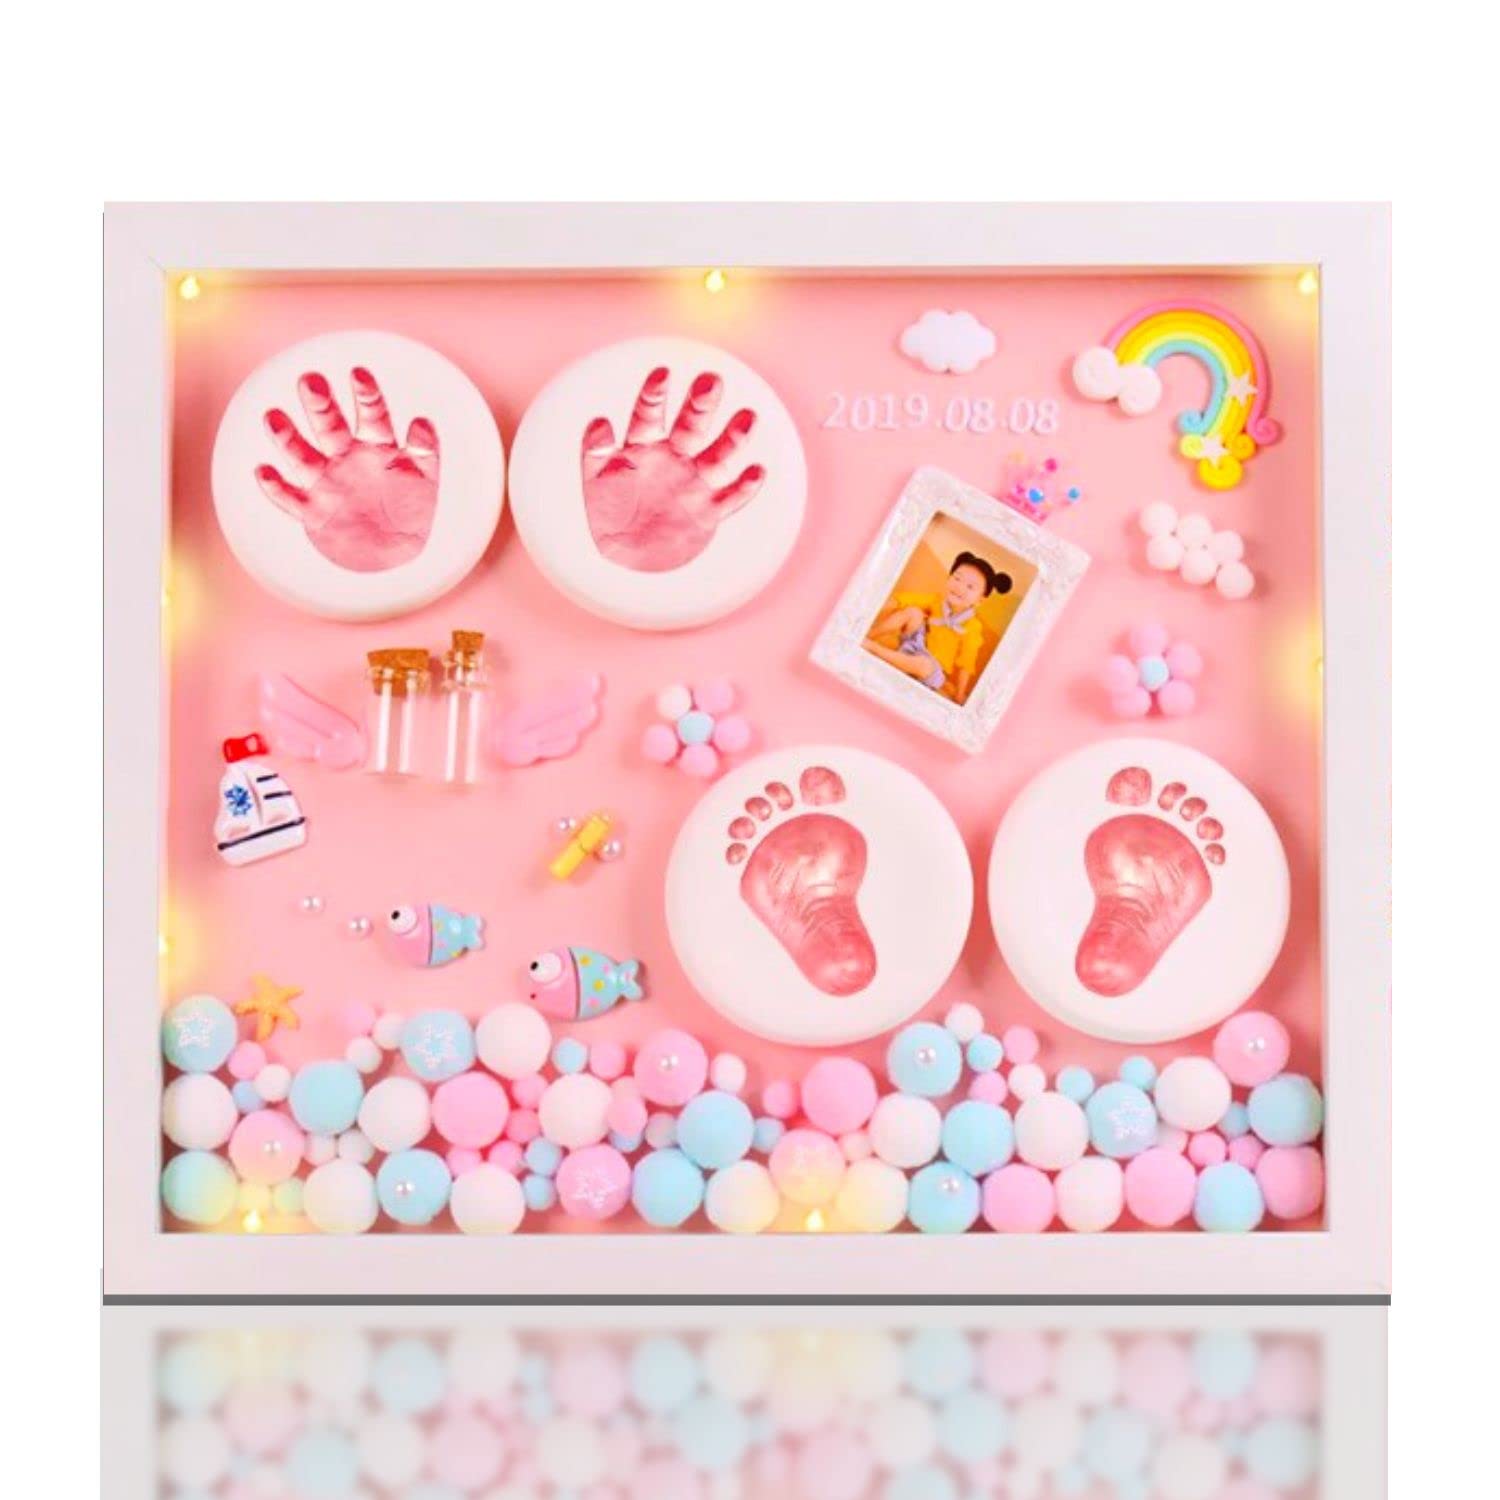 VISMIINTREND Clay Imprint Hand and Foot Printing Casting Kit